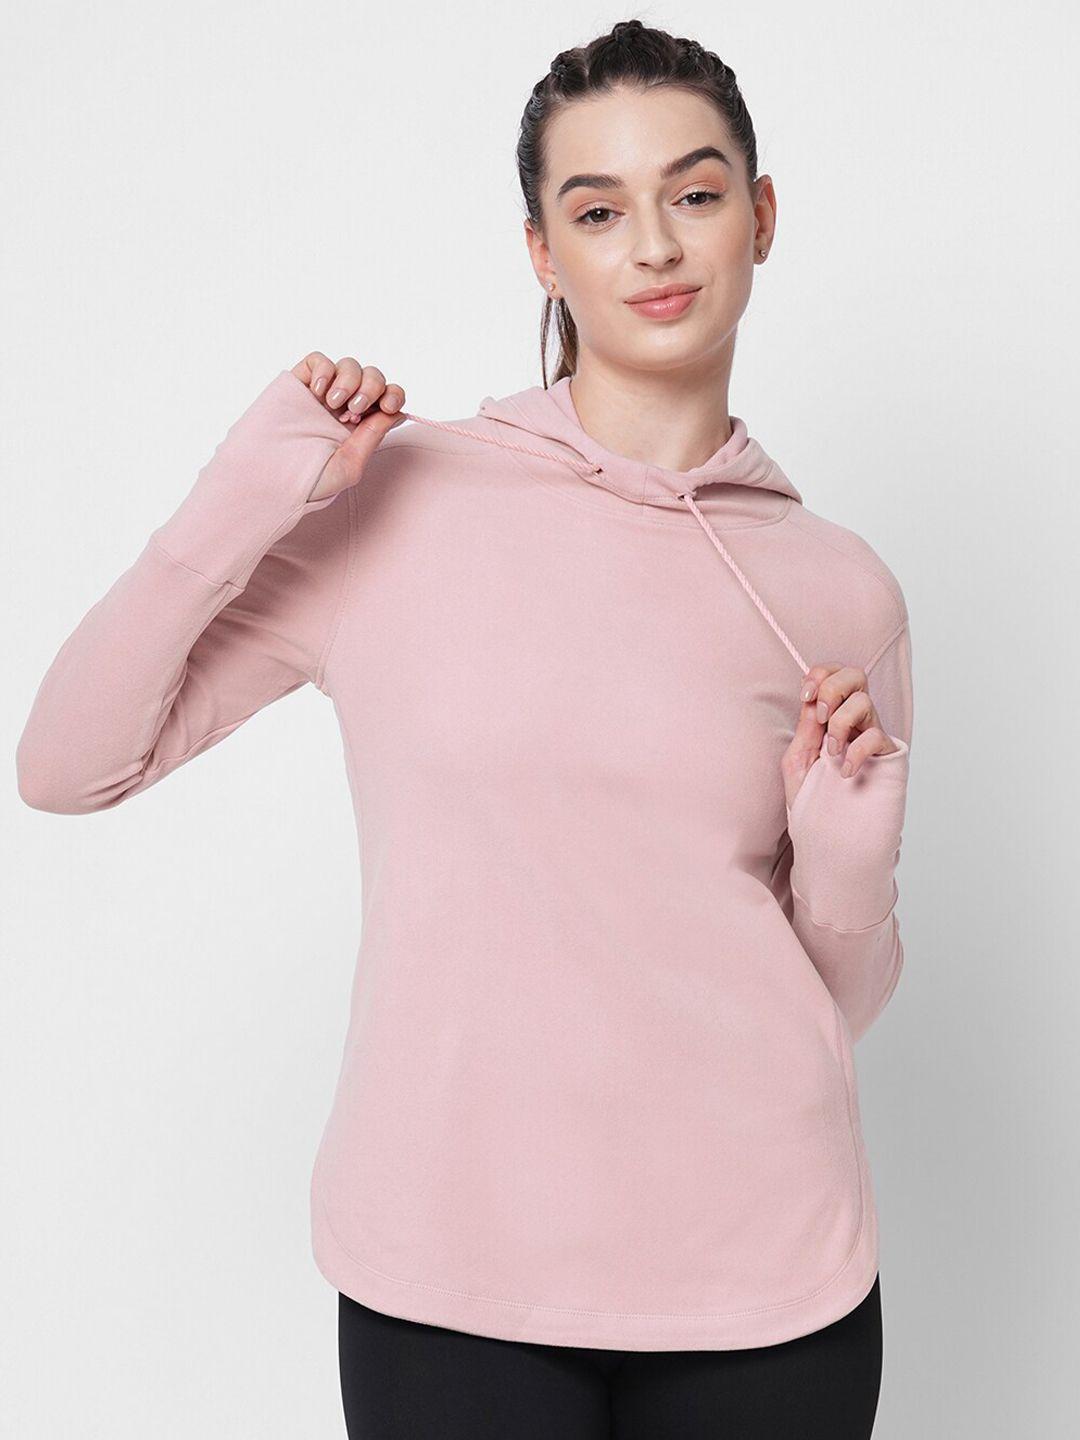 fitkin pink hooded top